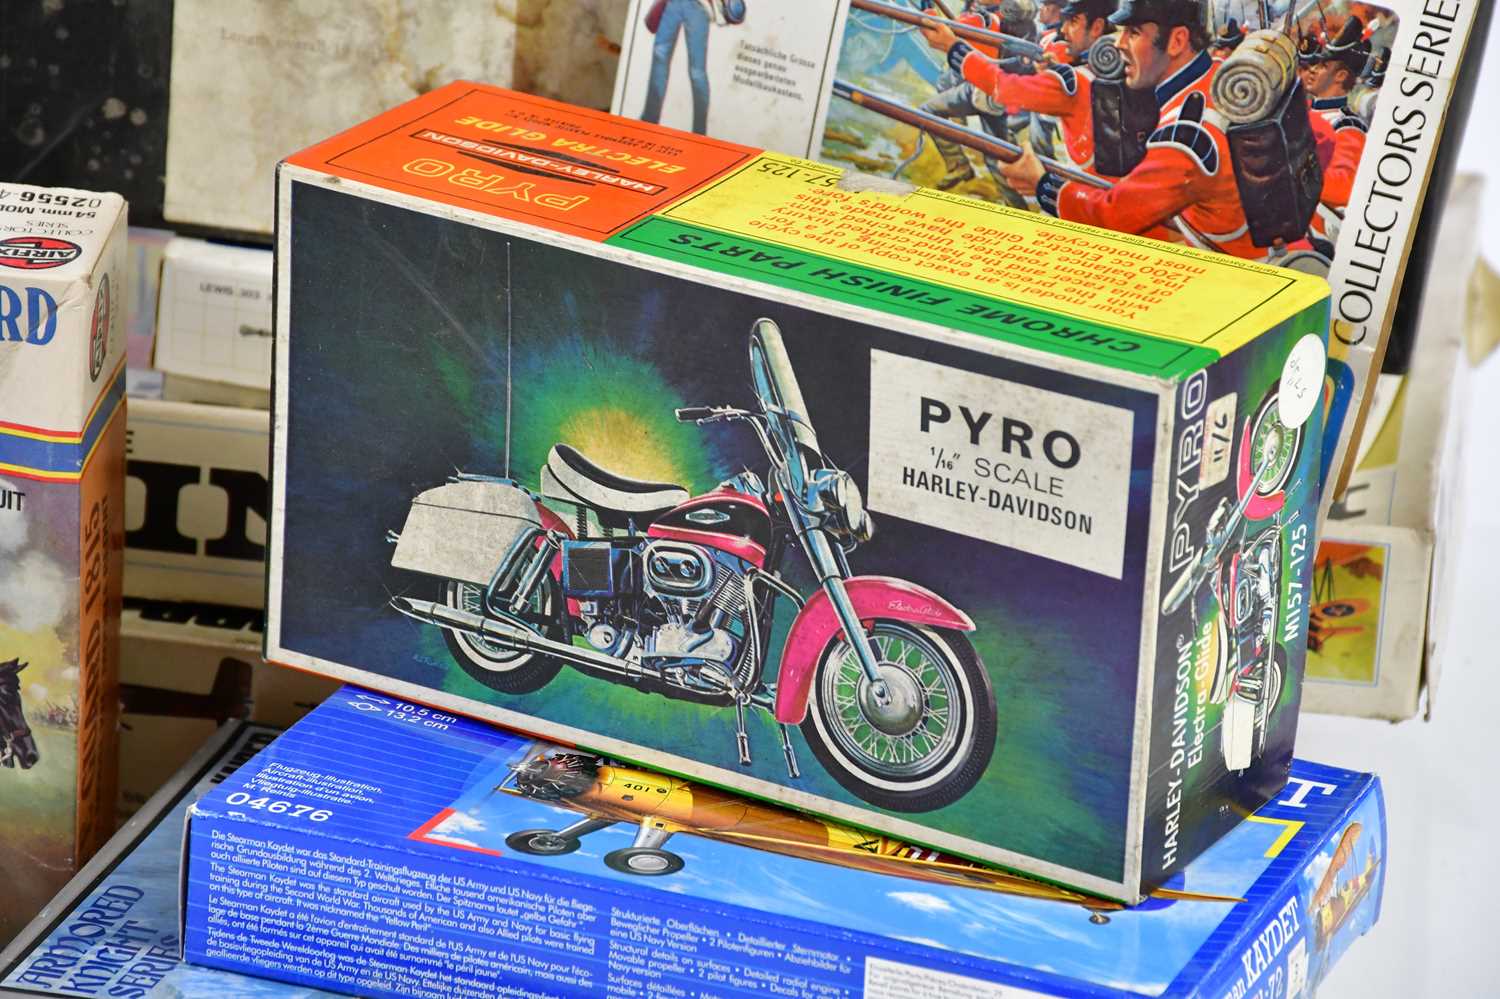 A collection of assorted model kits including a Pyro Harley Davidson Electra Glide M157-125, a - Bild 3 aus 3